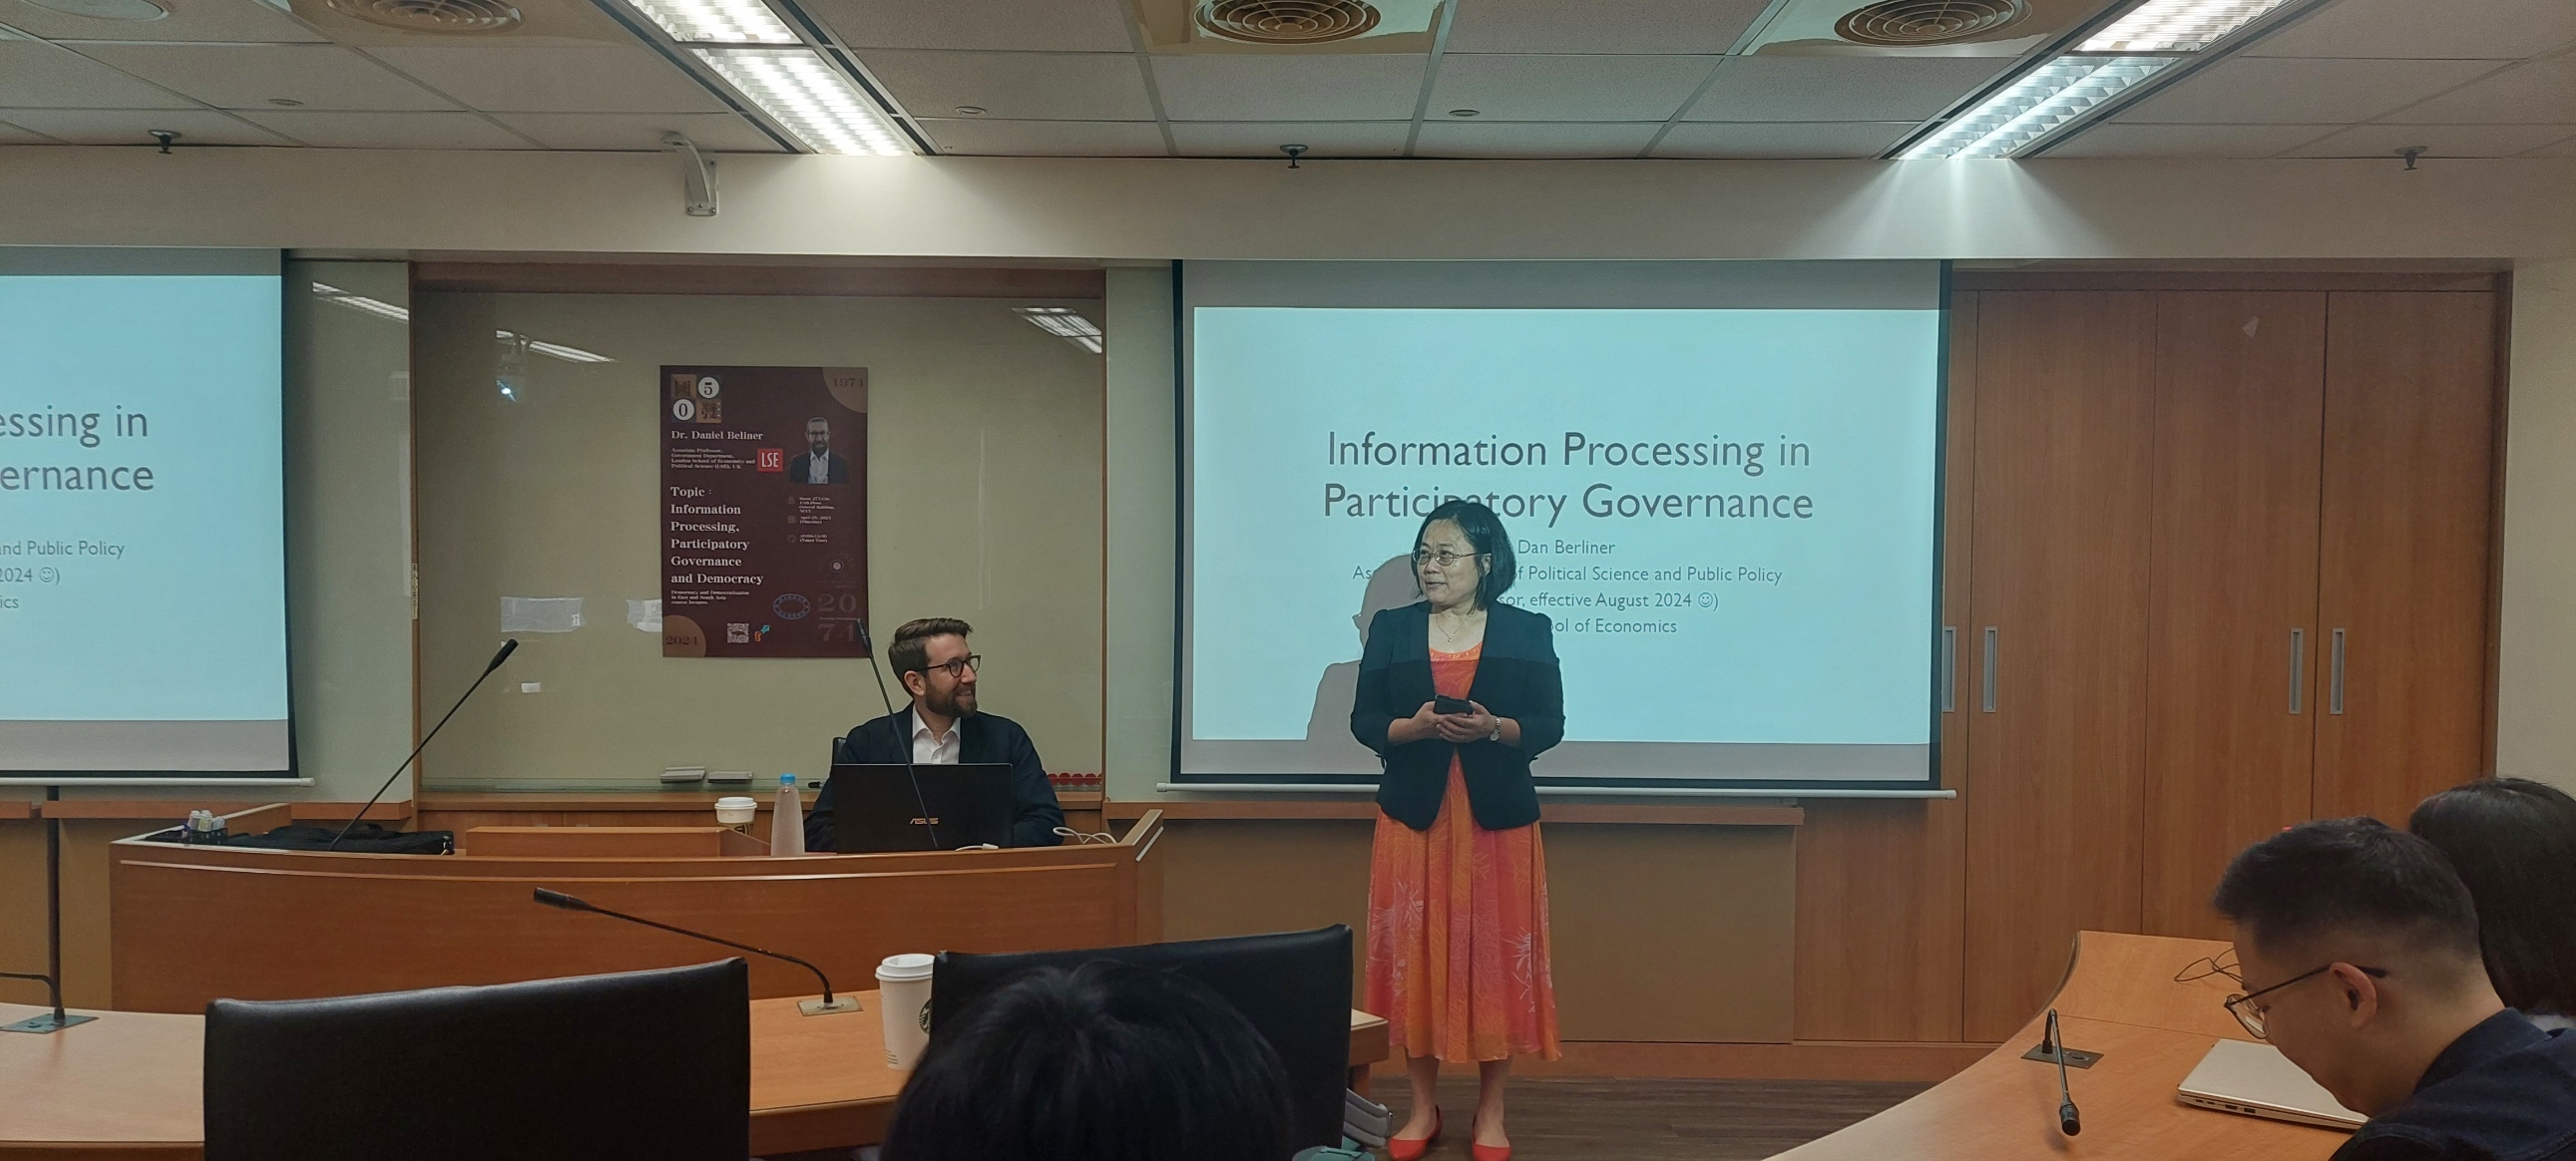 【GIDS 50th Anniversary Lecture Series】LSE Scholar Shares Research Findings on Participatory Governance